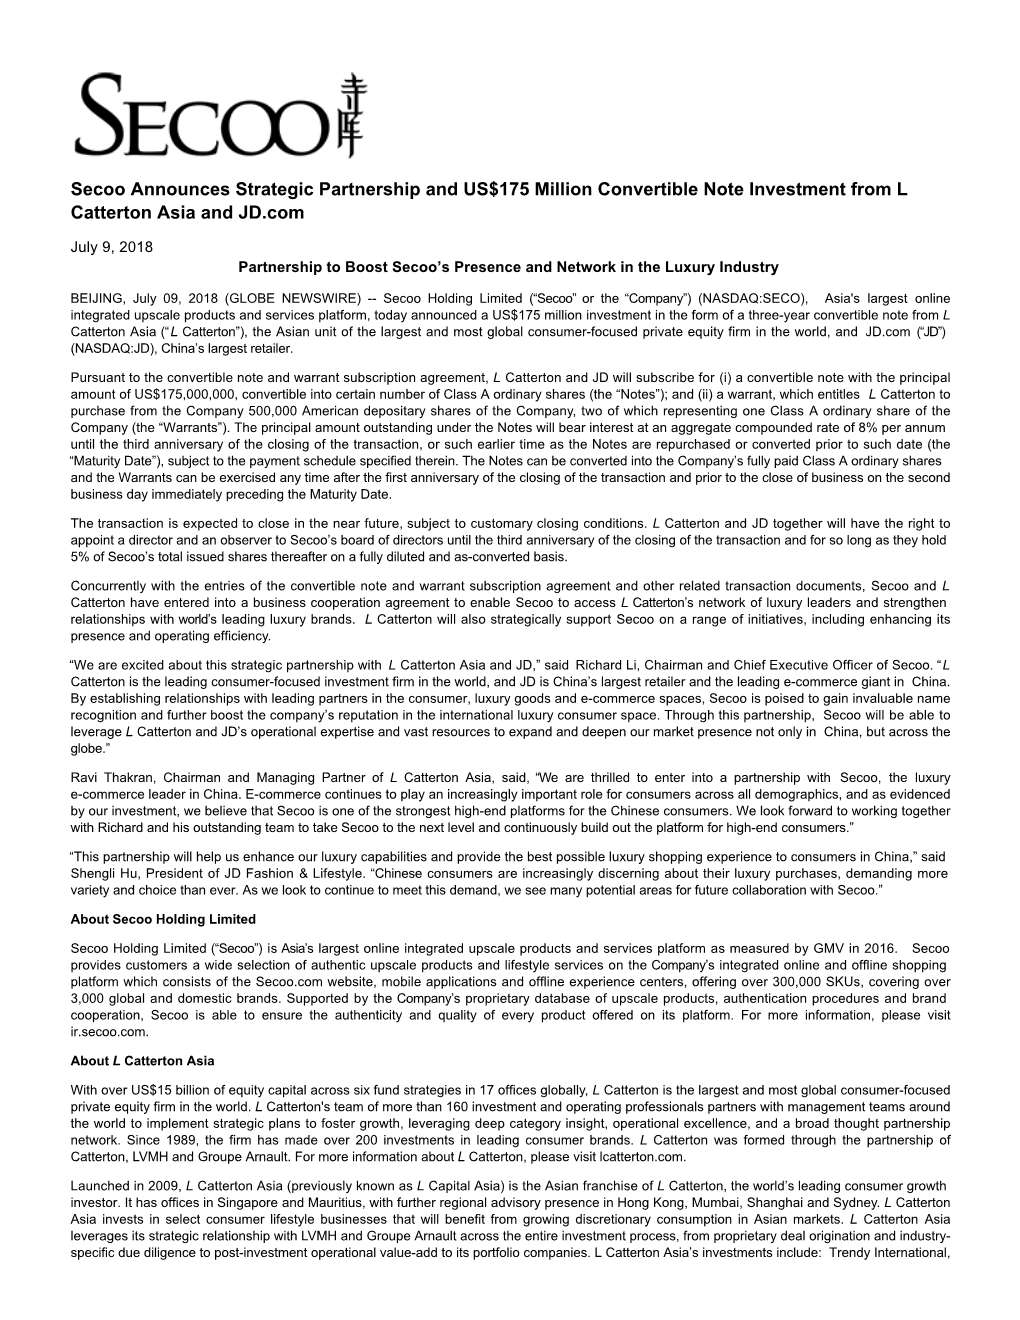 Secoo Announces Strategic Partnership and US$175 Million Convertible Note Investment from L Catterton Asia and JD.Com